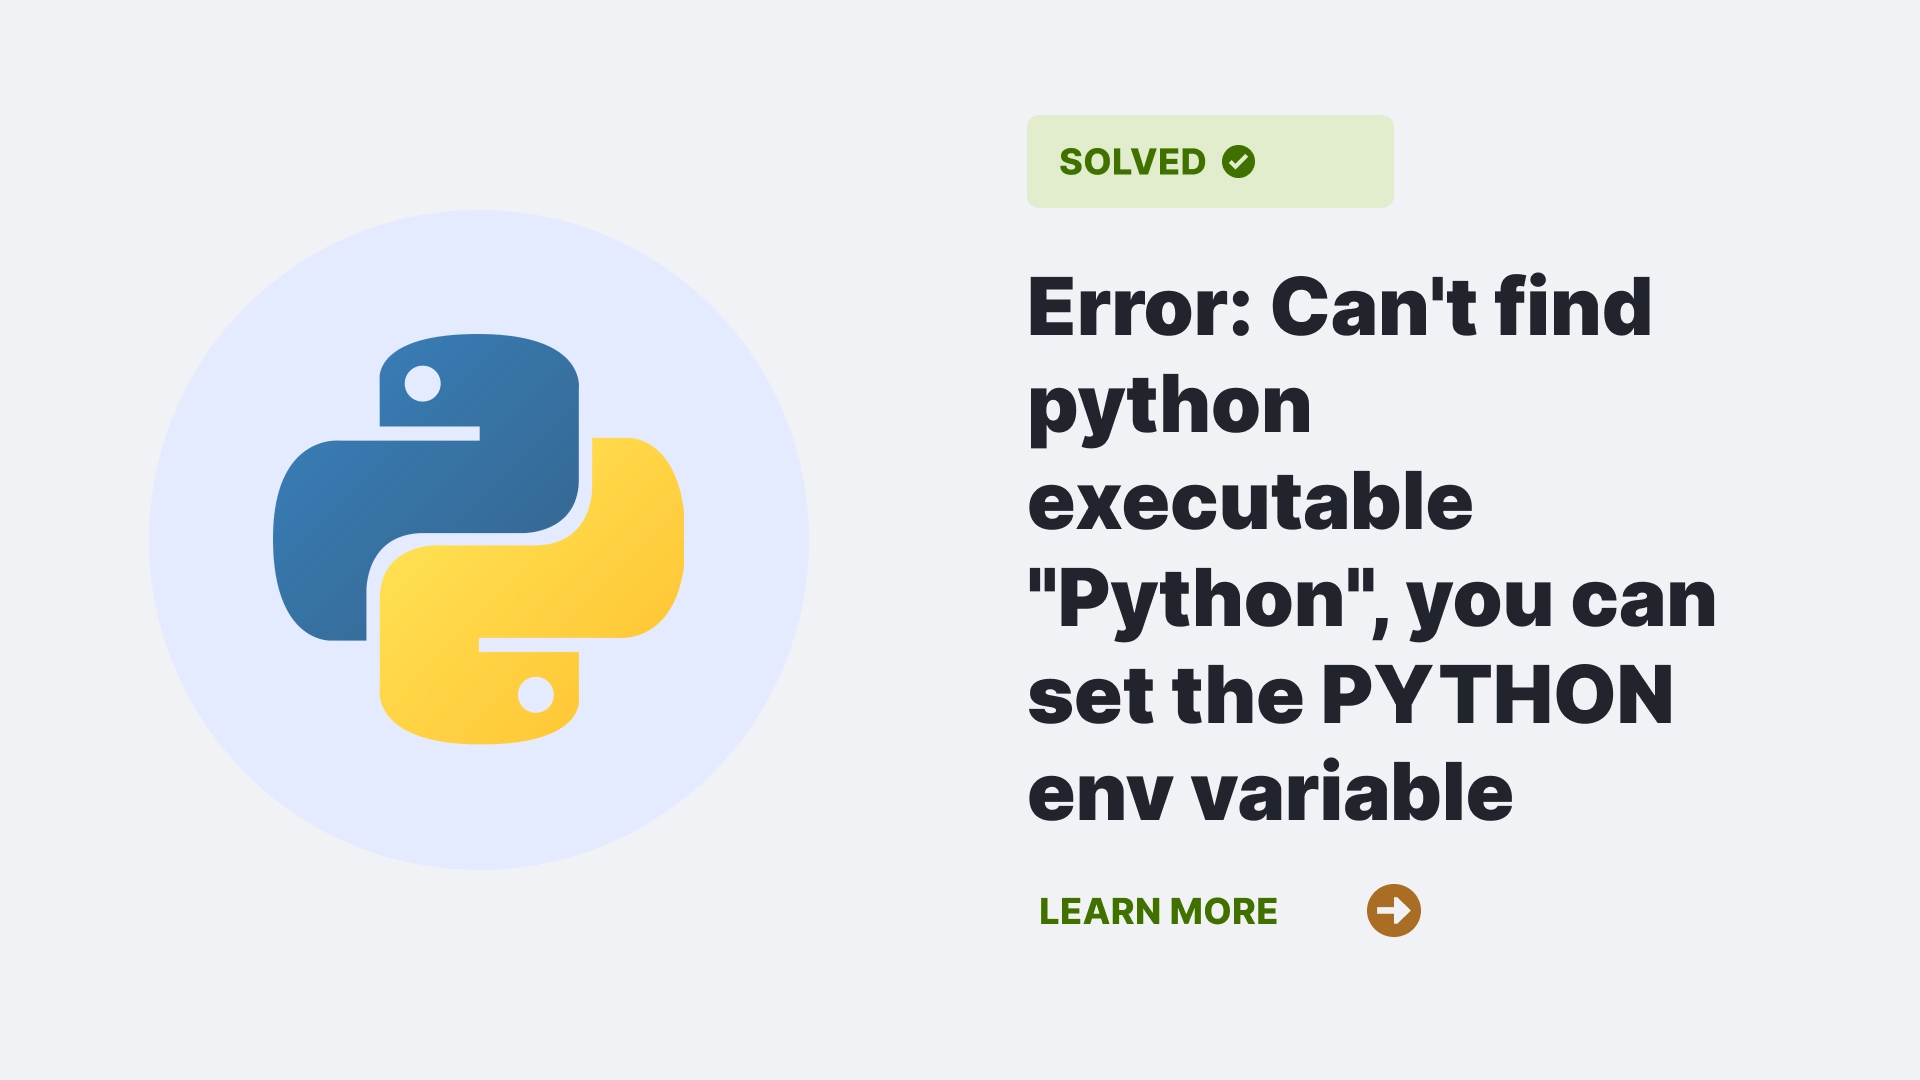 Error: Can't find python executable "Python", you can set the PYTHON env variable